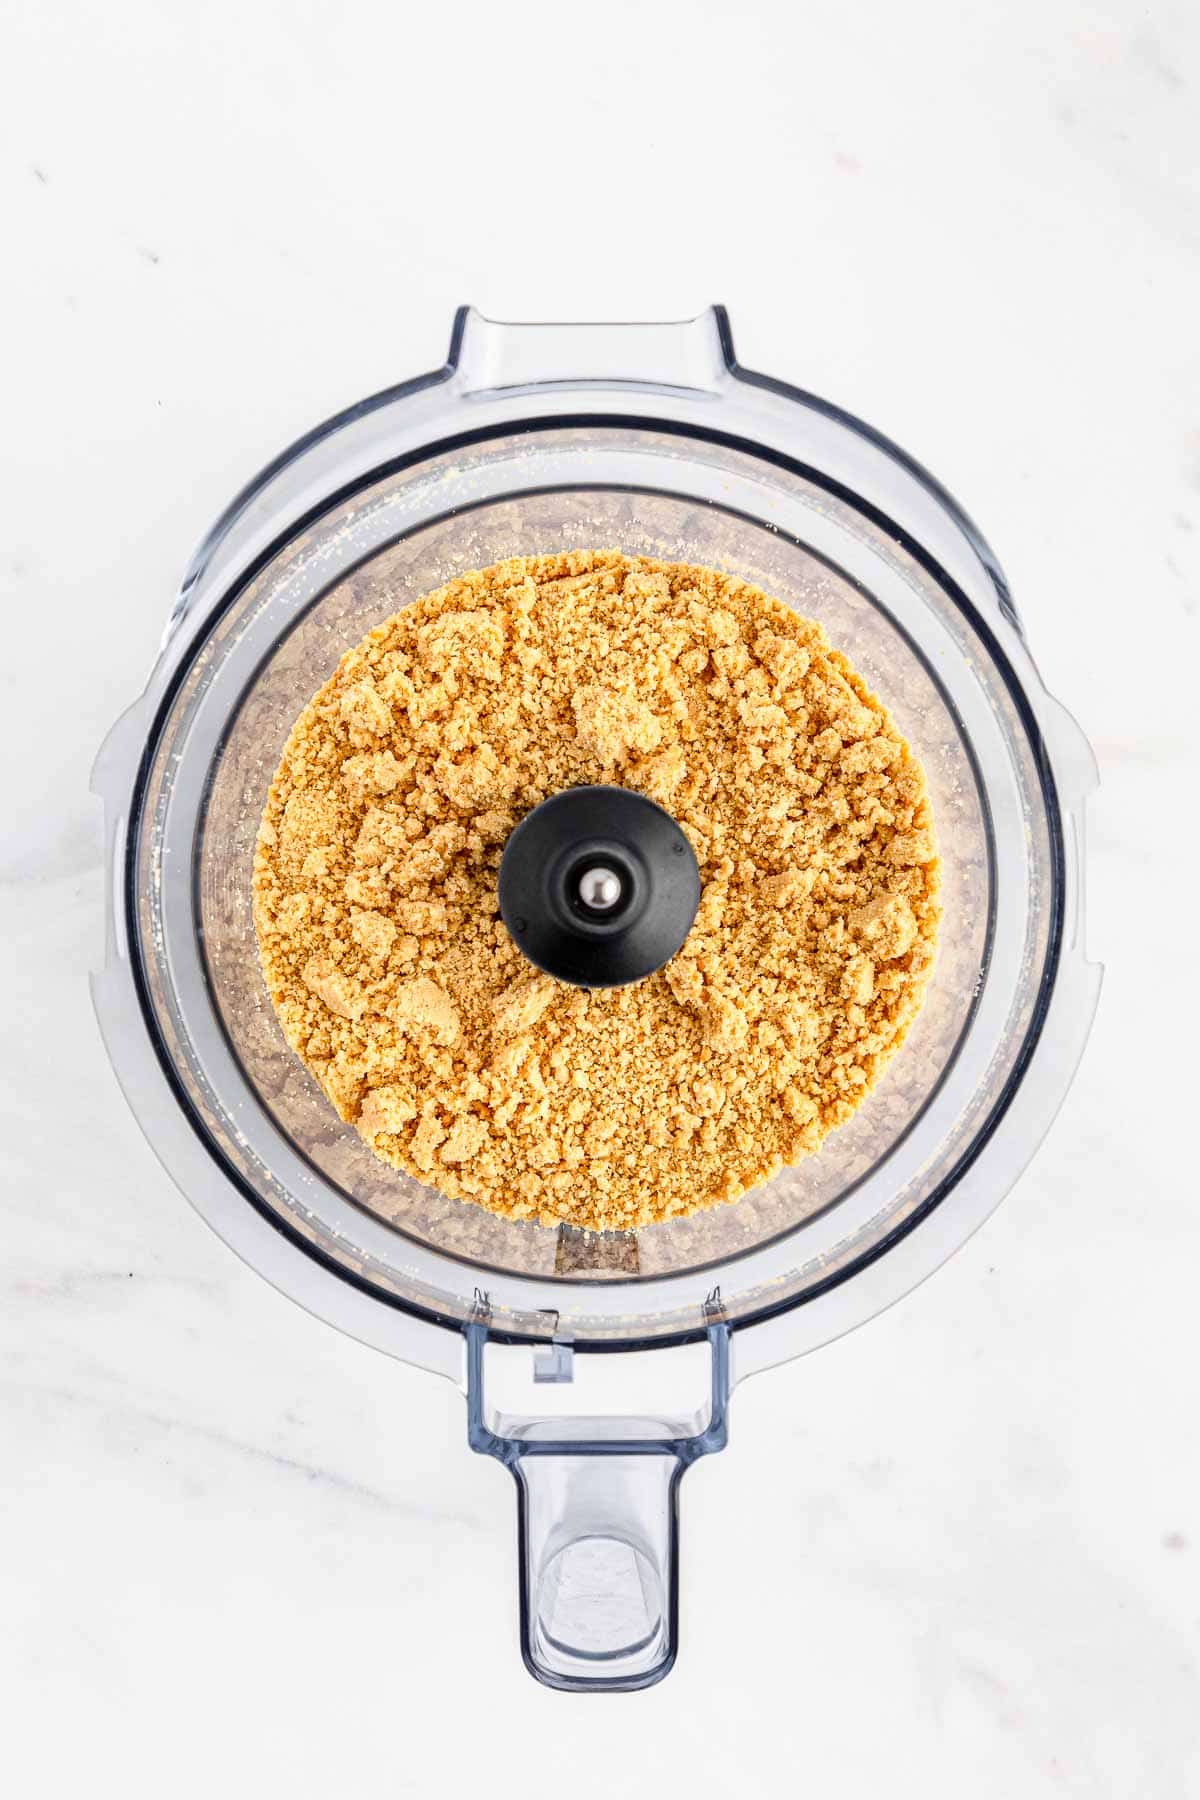 A food processor filled with a golden oreo crumbs.